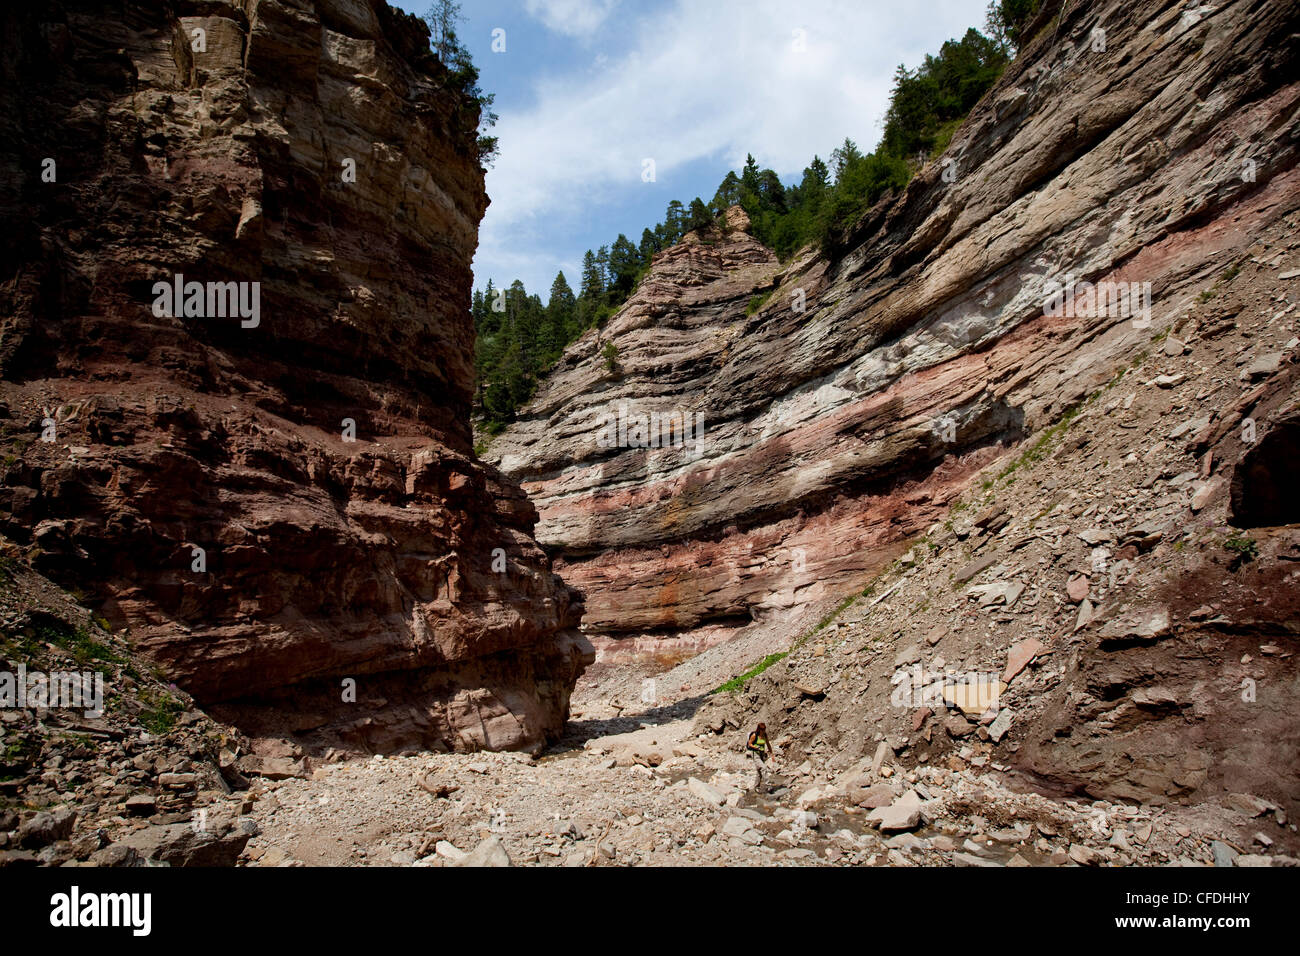 Geoparc Bletterbach, big gorge dug in the rock, in Aldein, Bolzano province, South Tyrol, Italy, Europe Stock Photo